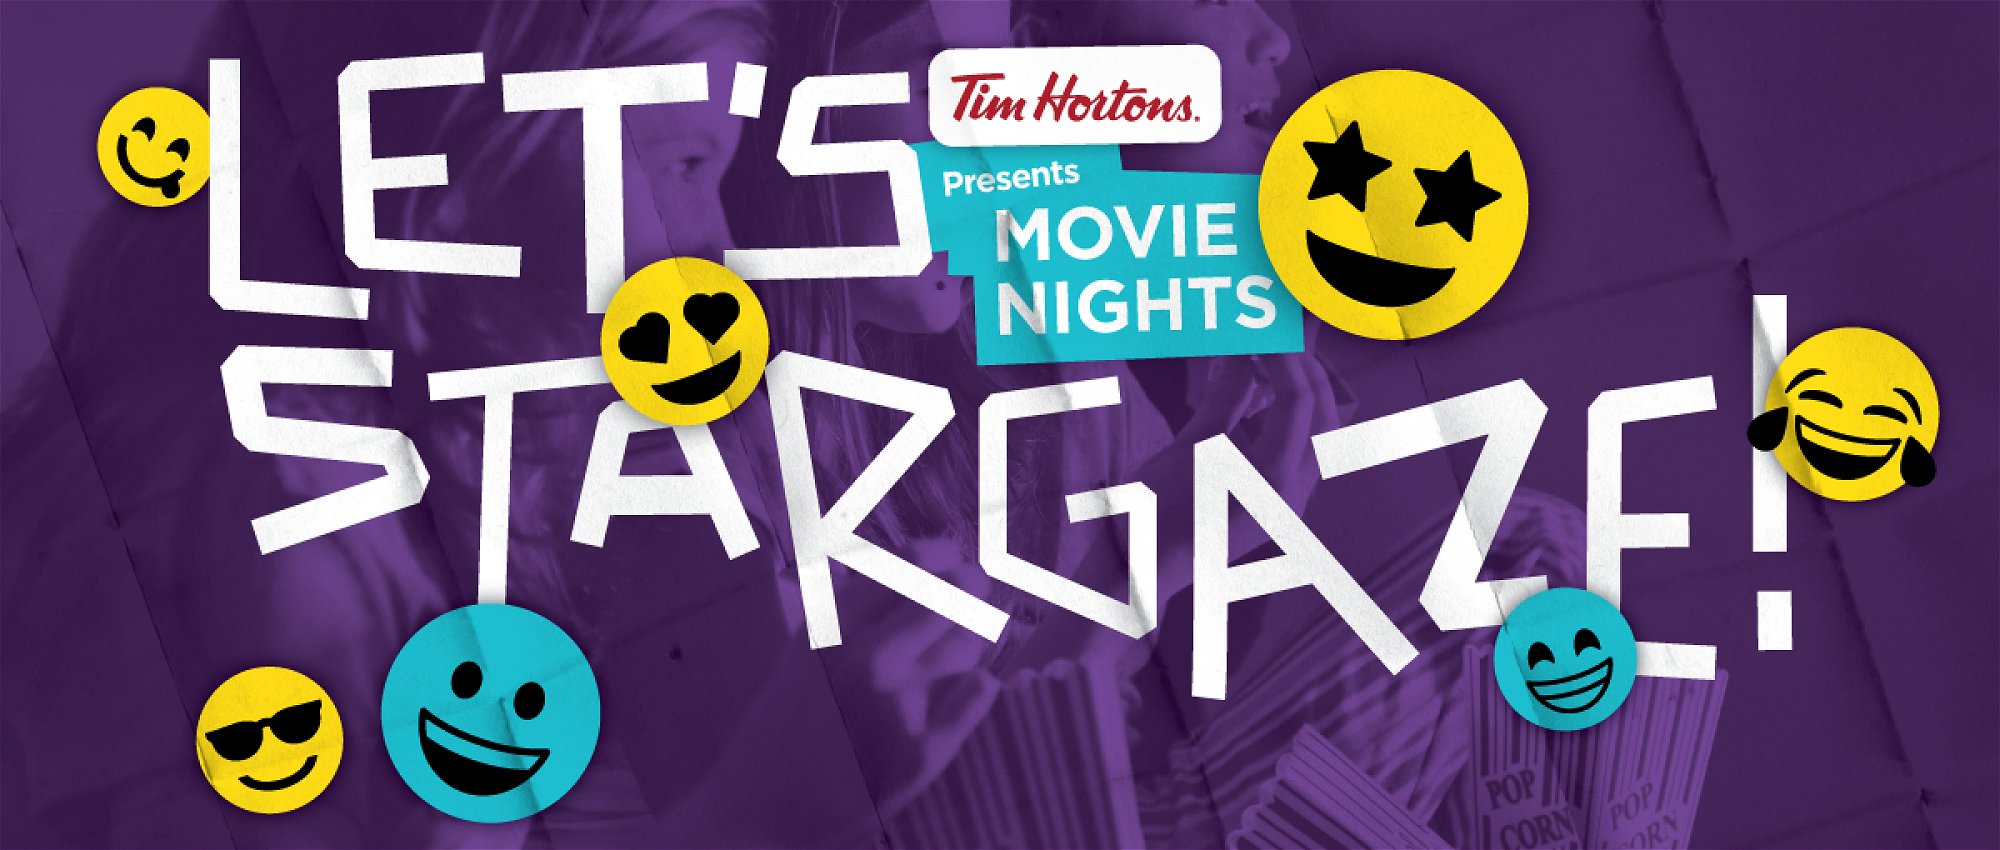 Celebration Square Thursday Movie Nights Google image from https://culture.mississauga.ca/sites/default/files/event/movienights2017_1200x600_r1eventpage.png8